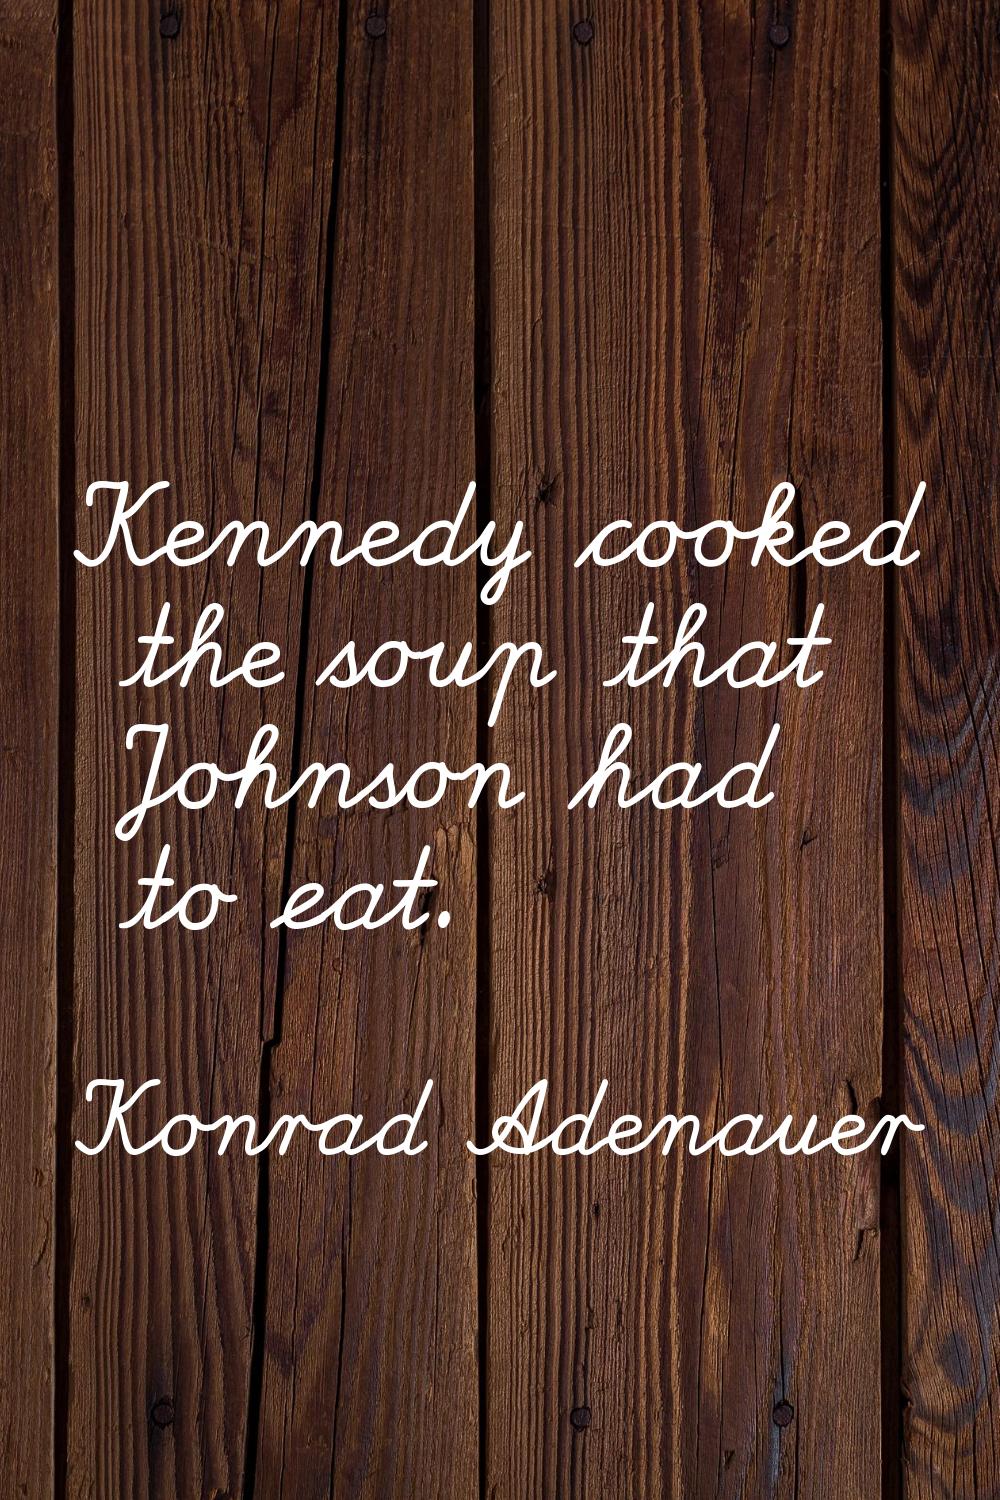 Kennedy cooked the soup that Johnson had to eat.